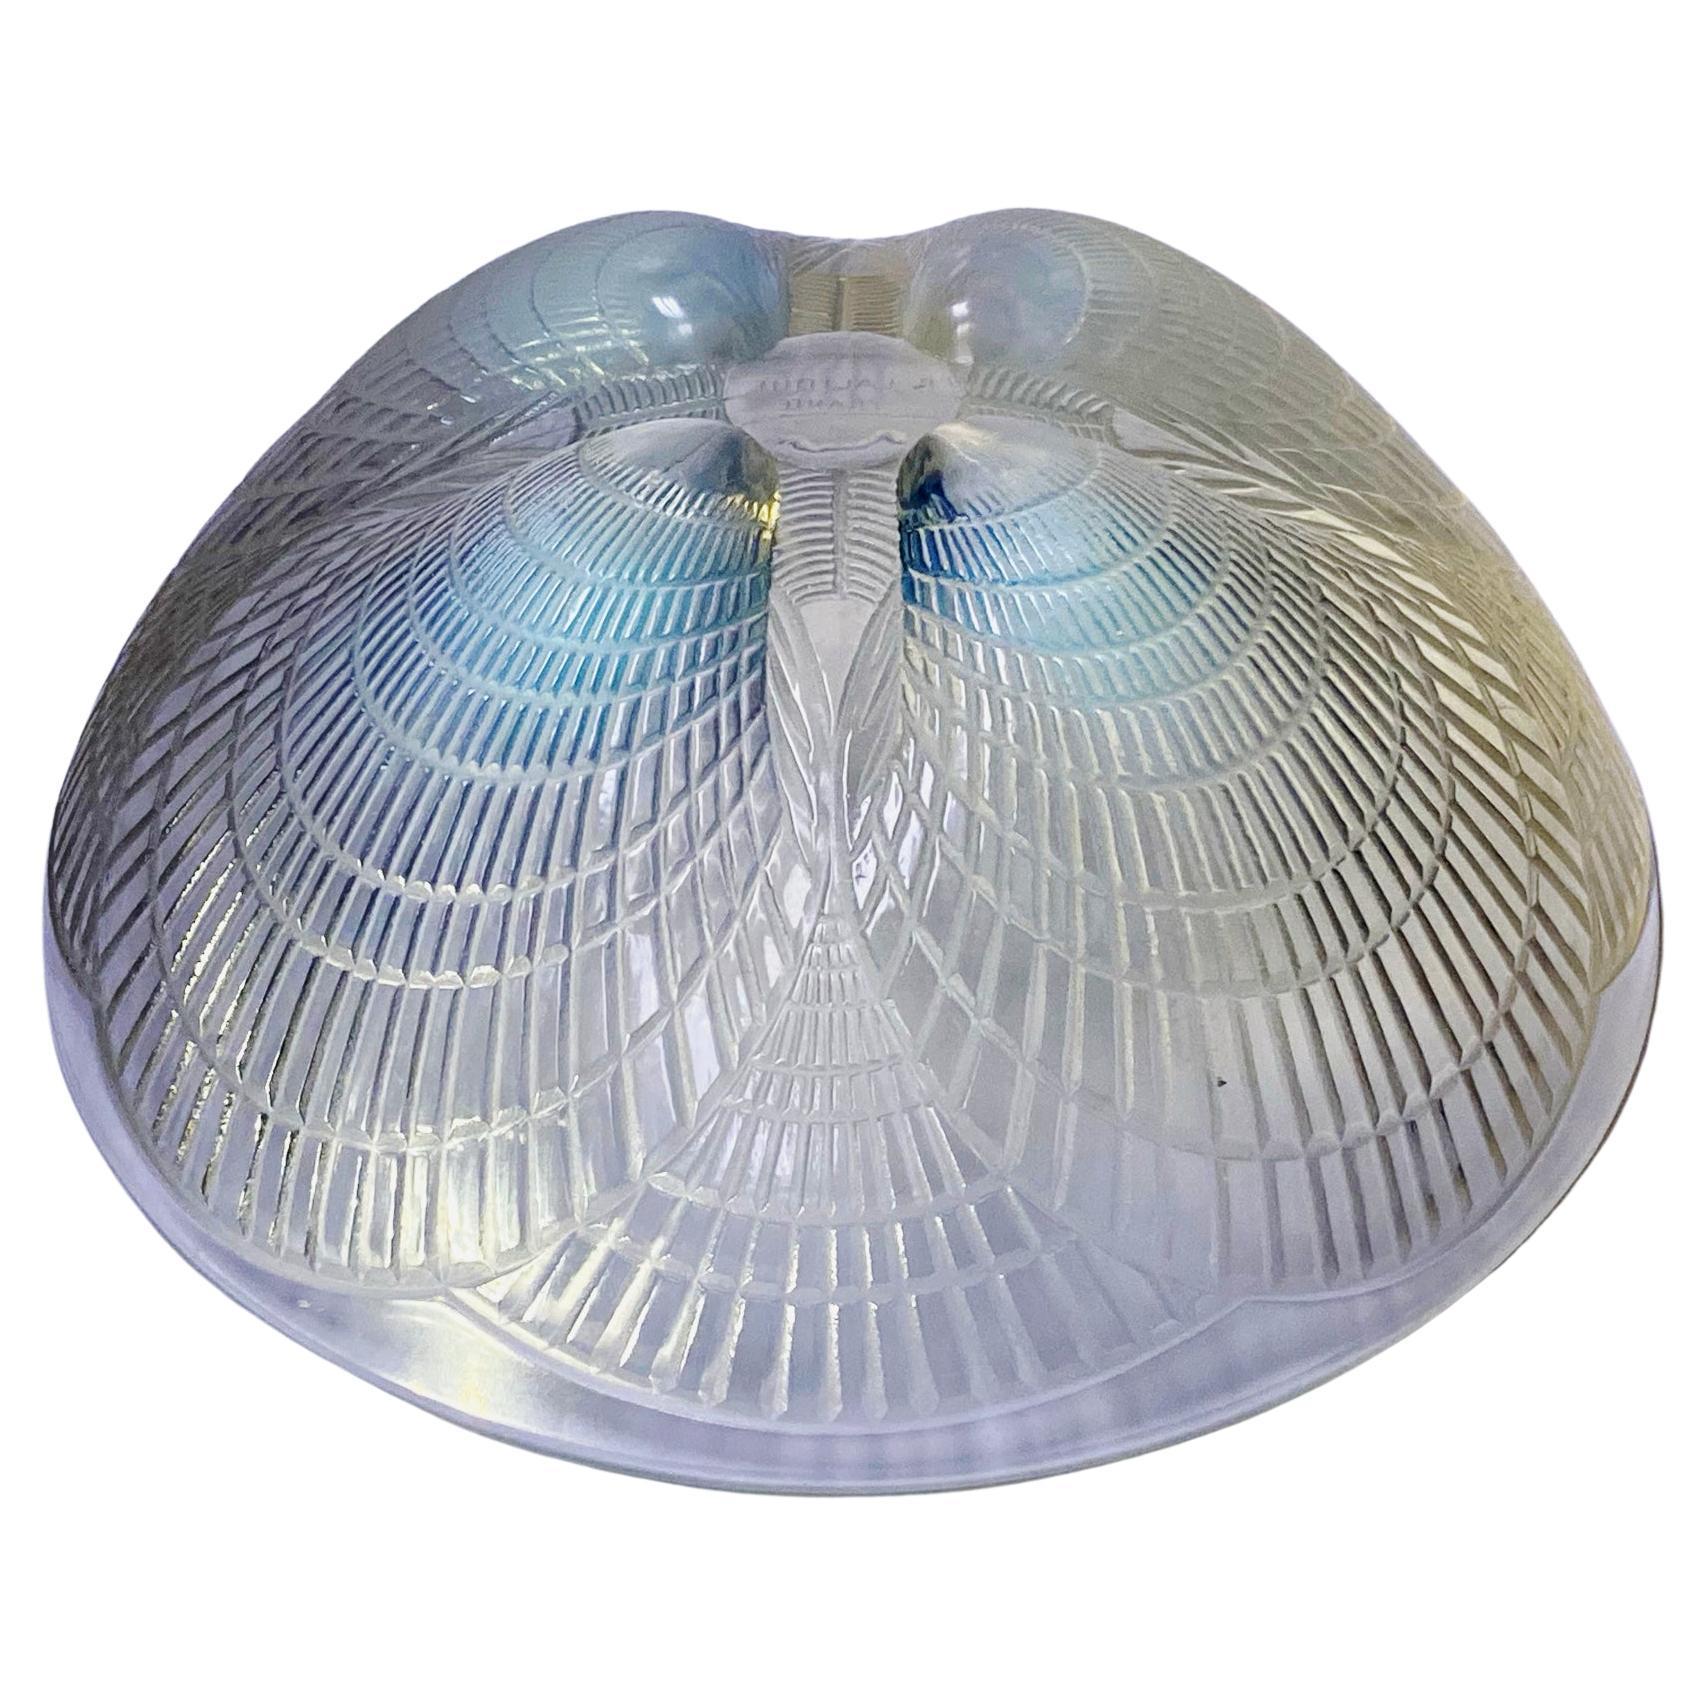 1930's René Lalique opalescent coquilles bowl no 3200. Introduced in 1924 and discontinued in 1947. Eight round seashells decorated with clear, frosted and opalescent glass. Ref: catalogue raisonné de l'oeuvre de Lalique par Félix Marcilhac sous le